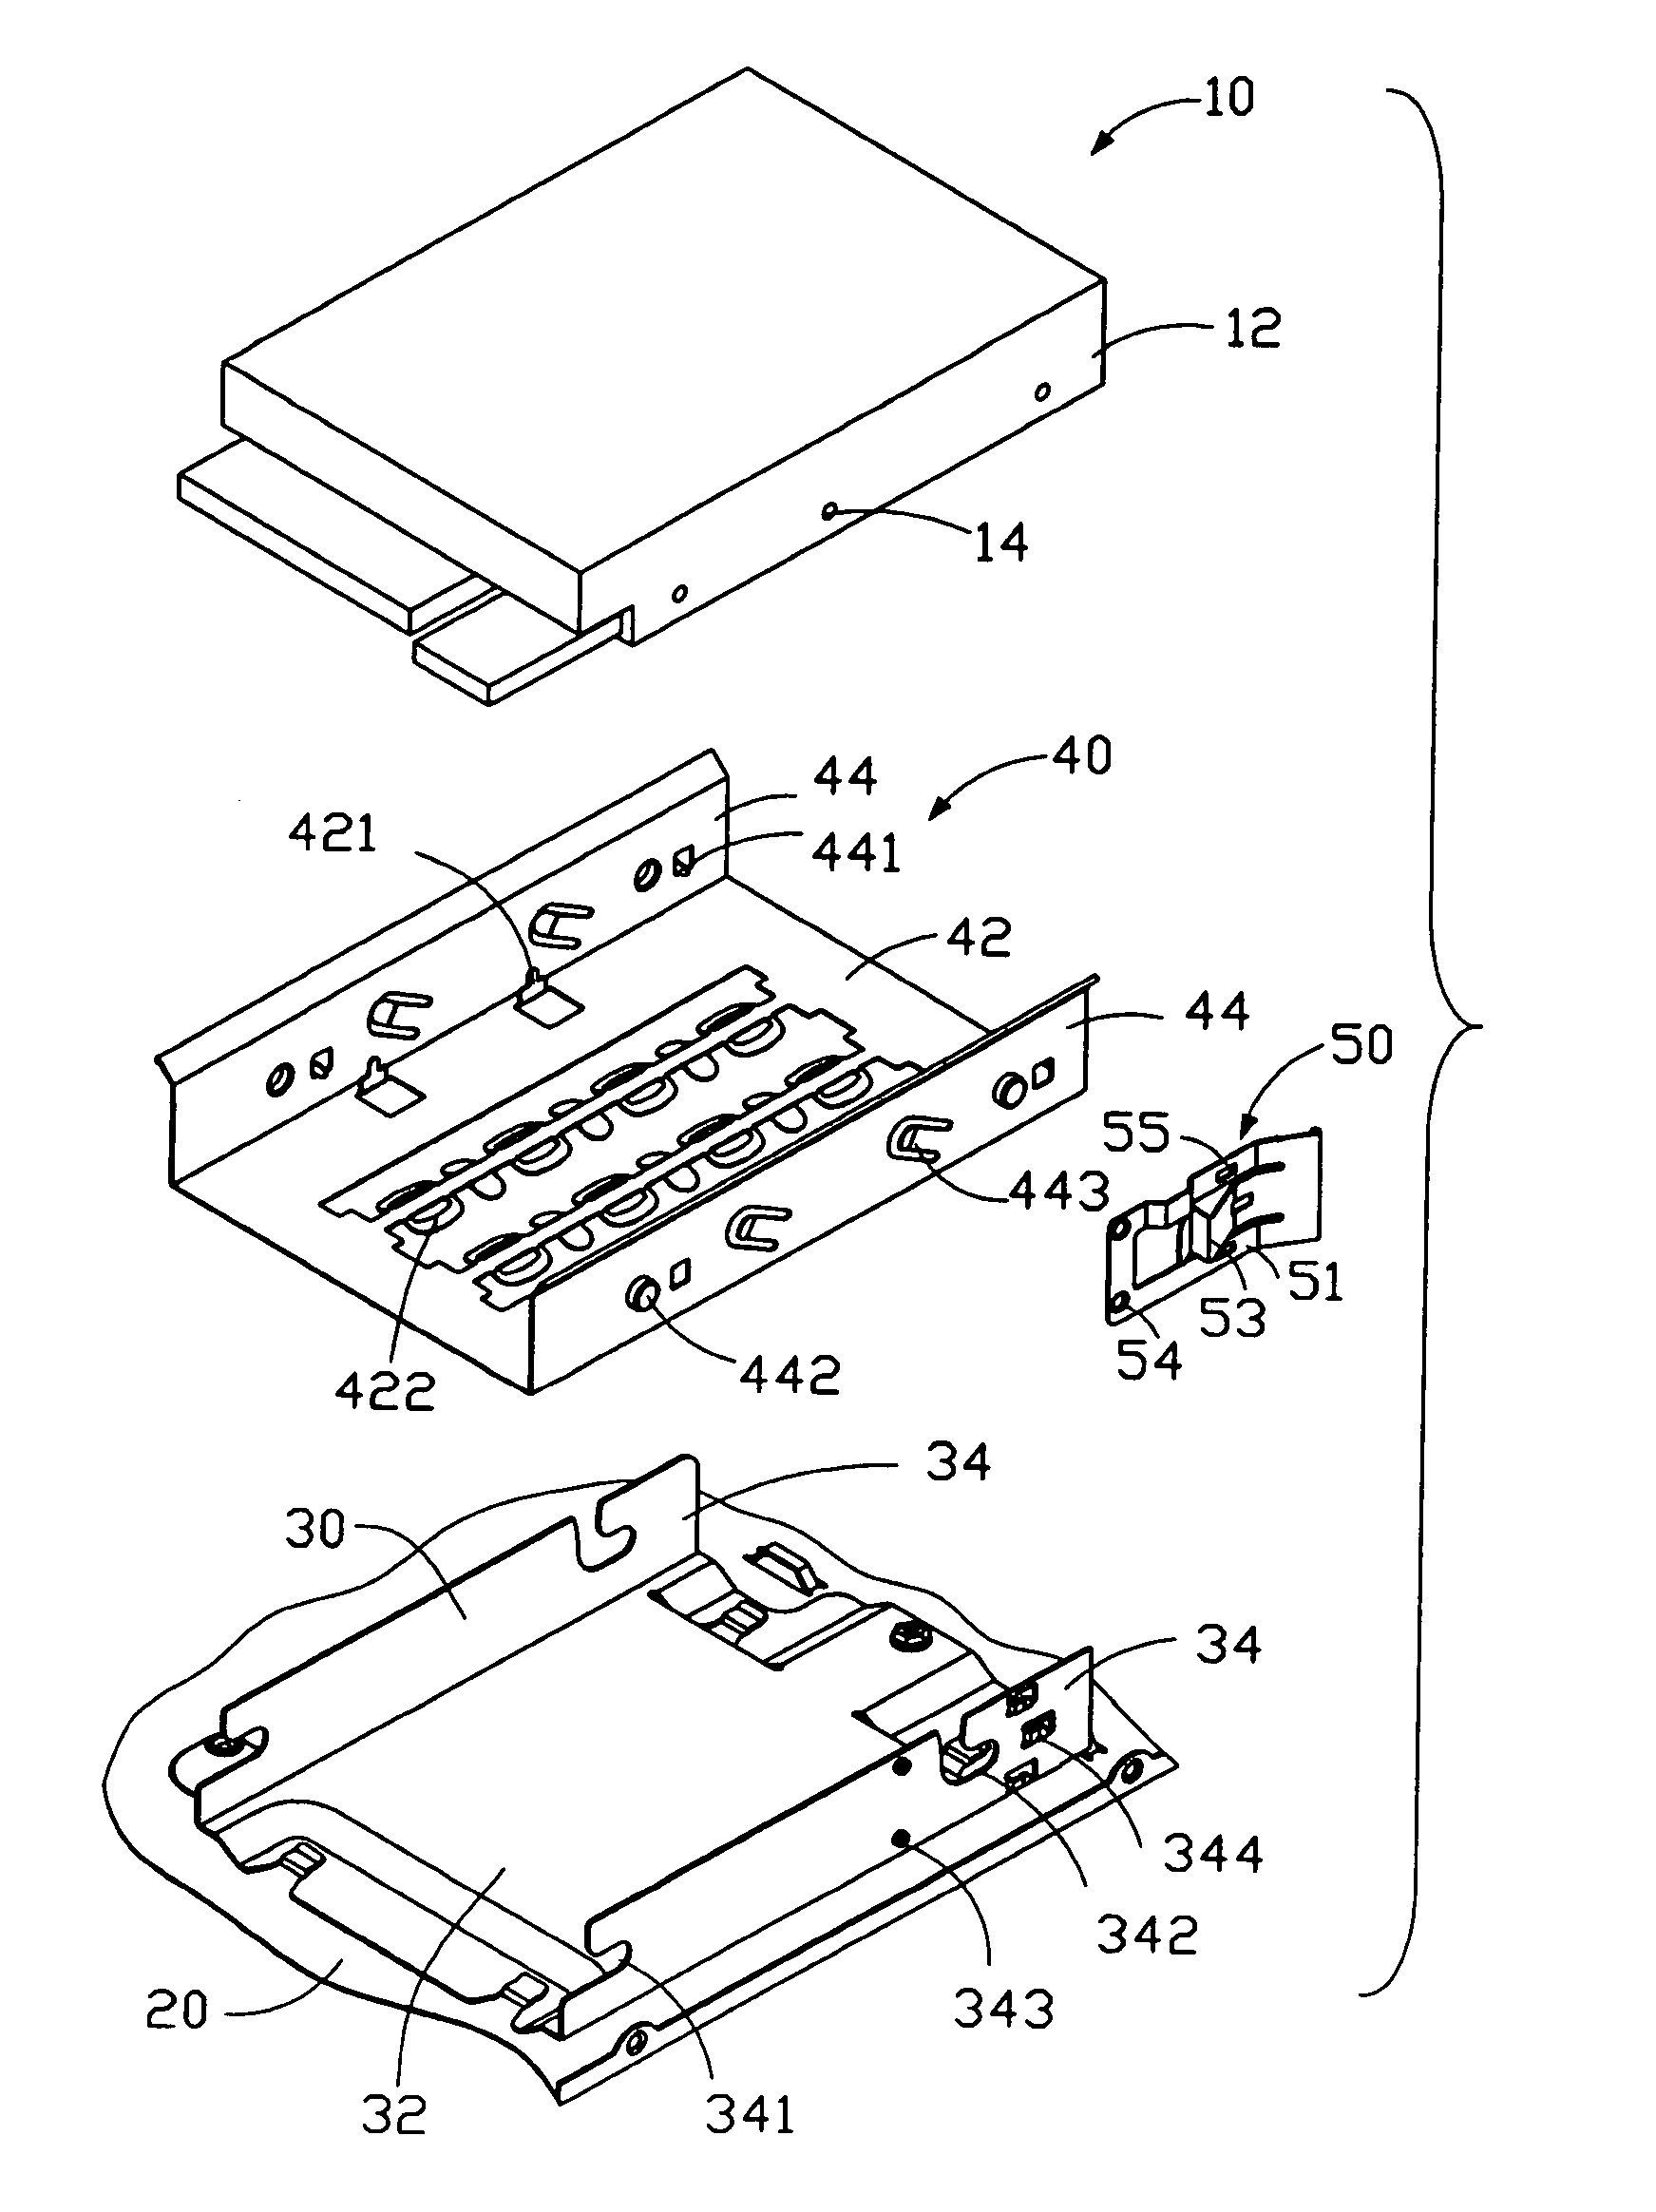 Mounting apparatus for data storage device